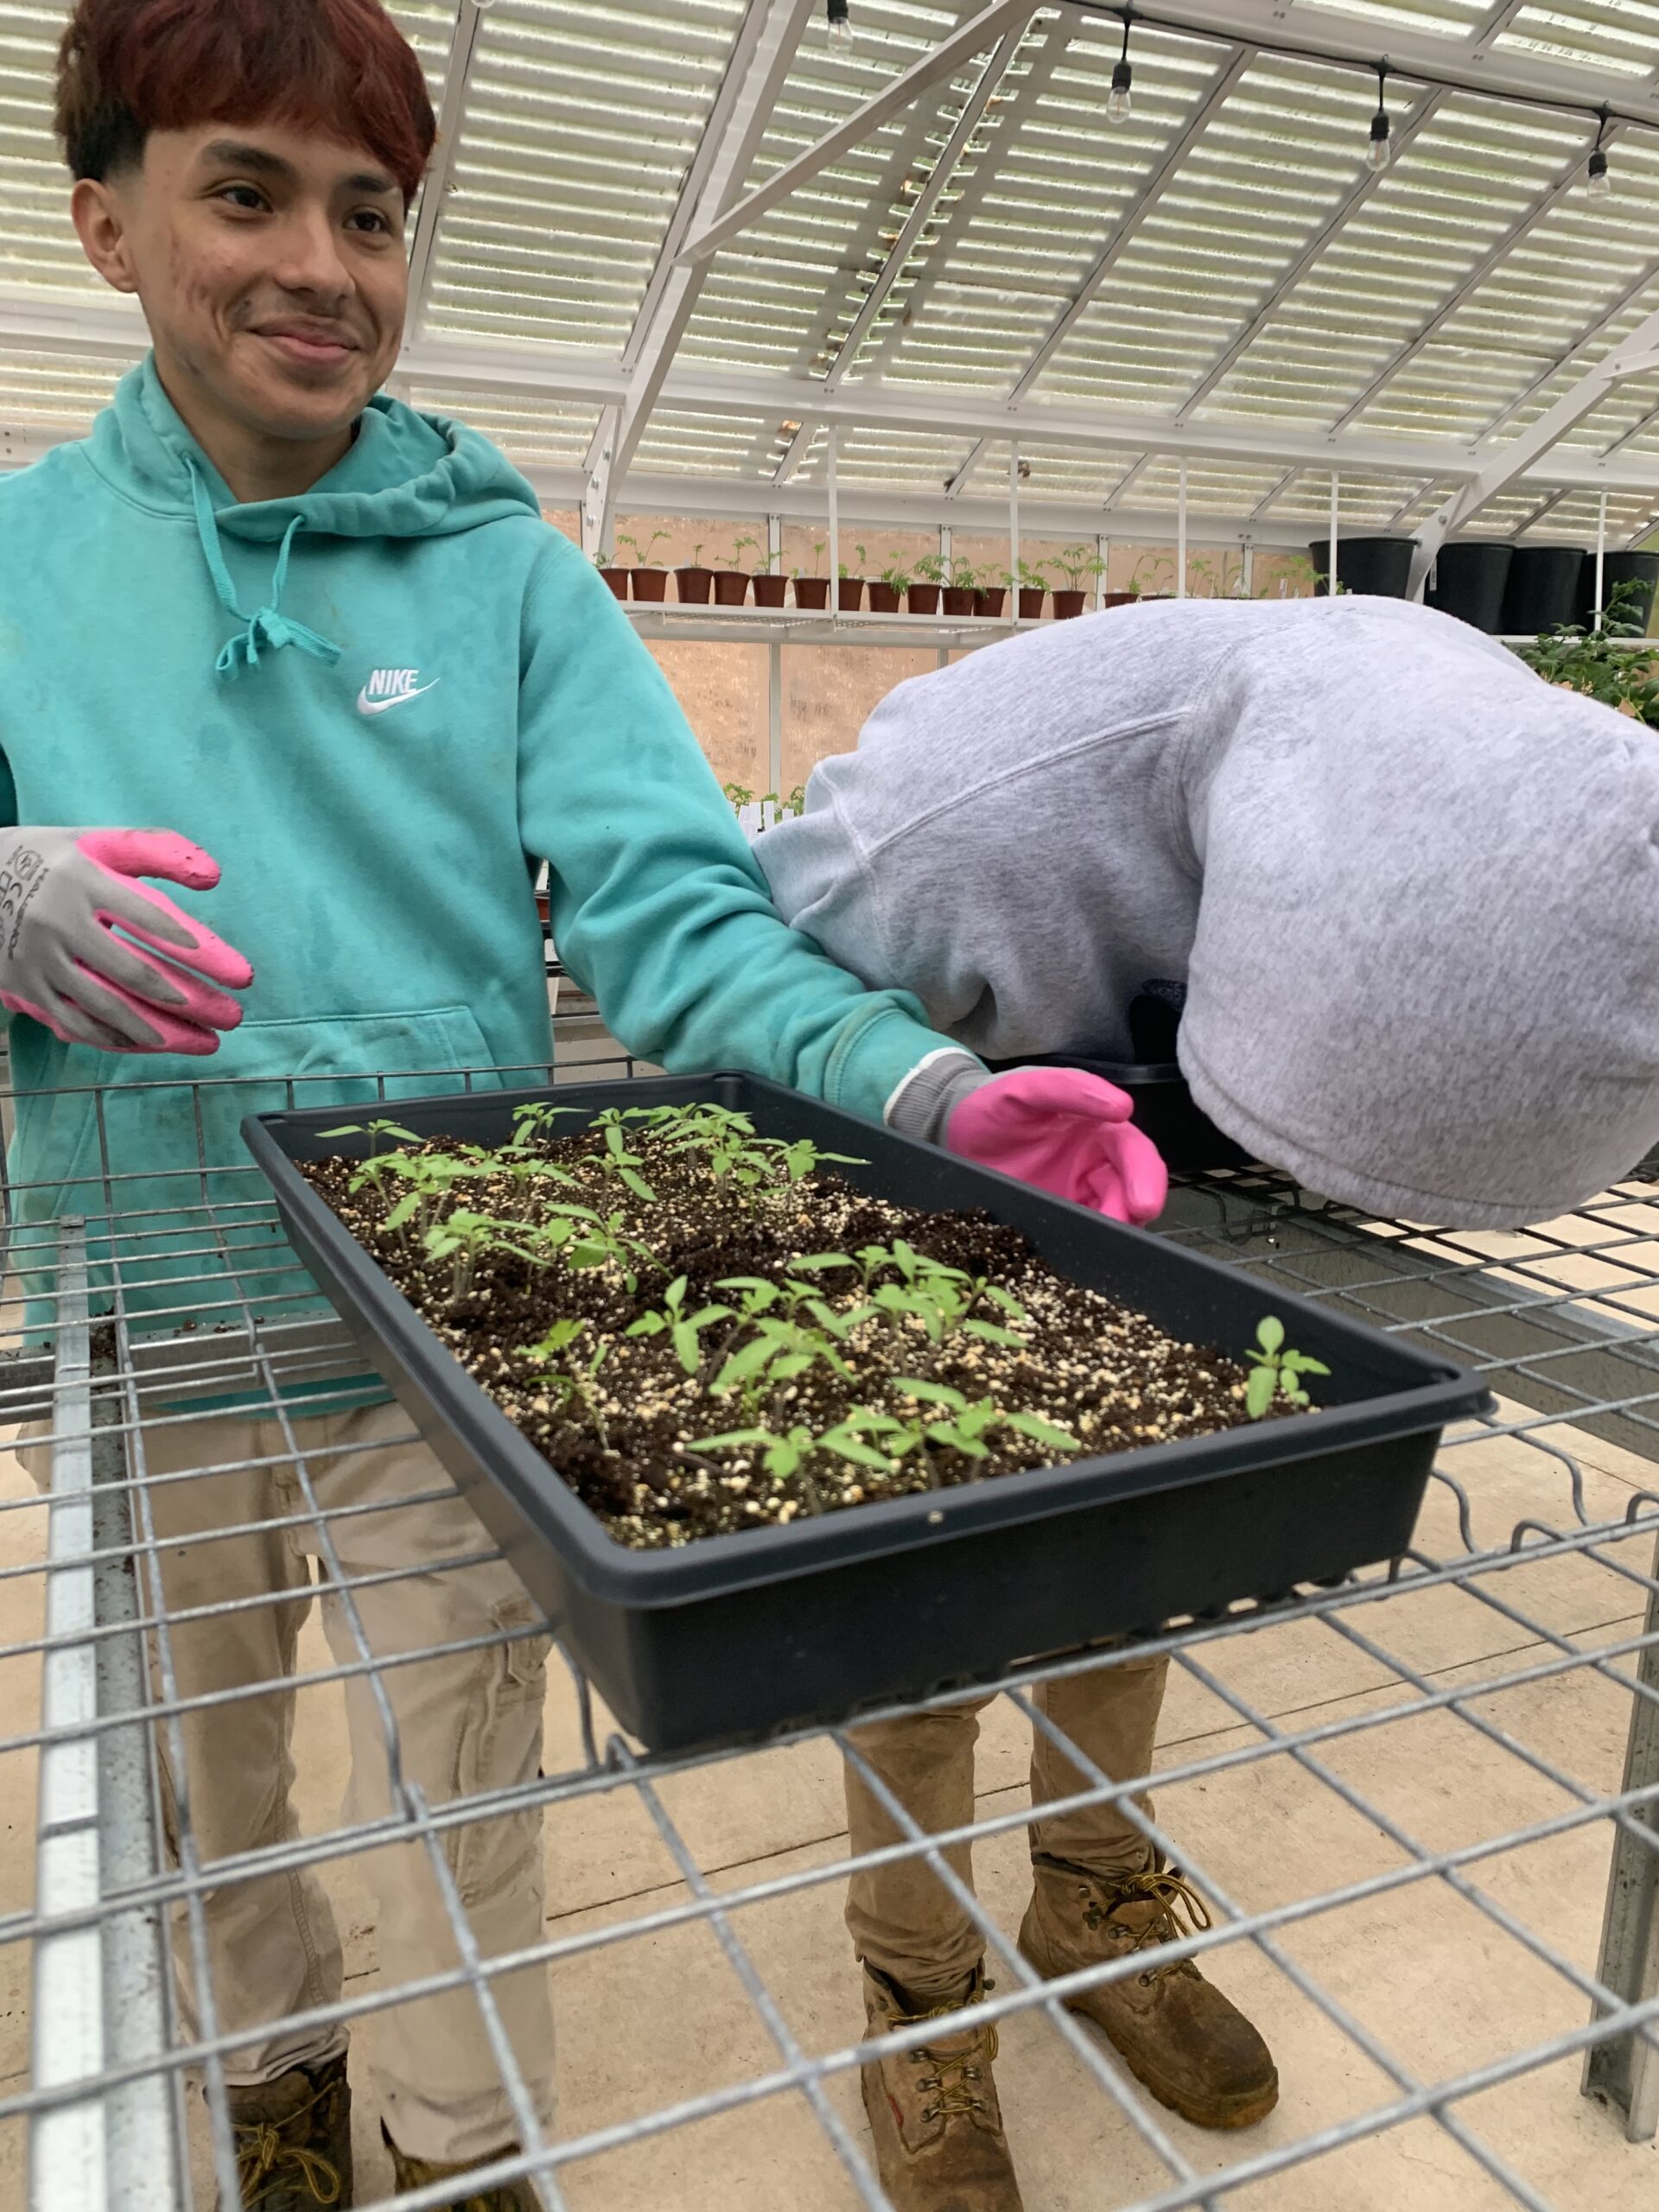 Intern Hector transfers plants in the Greenhouse.